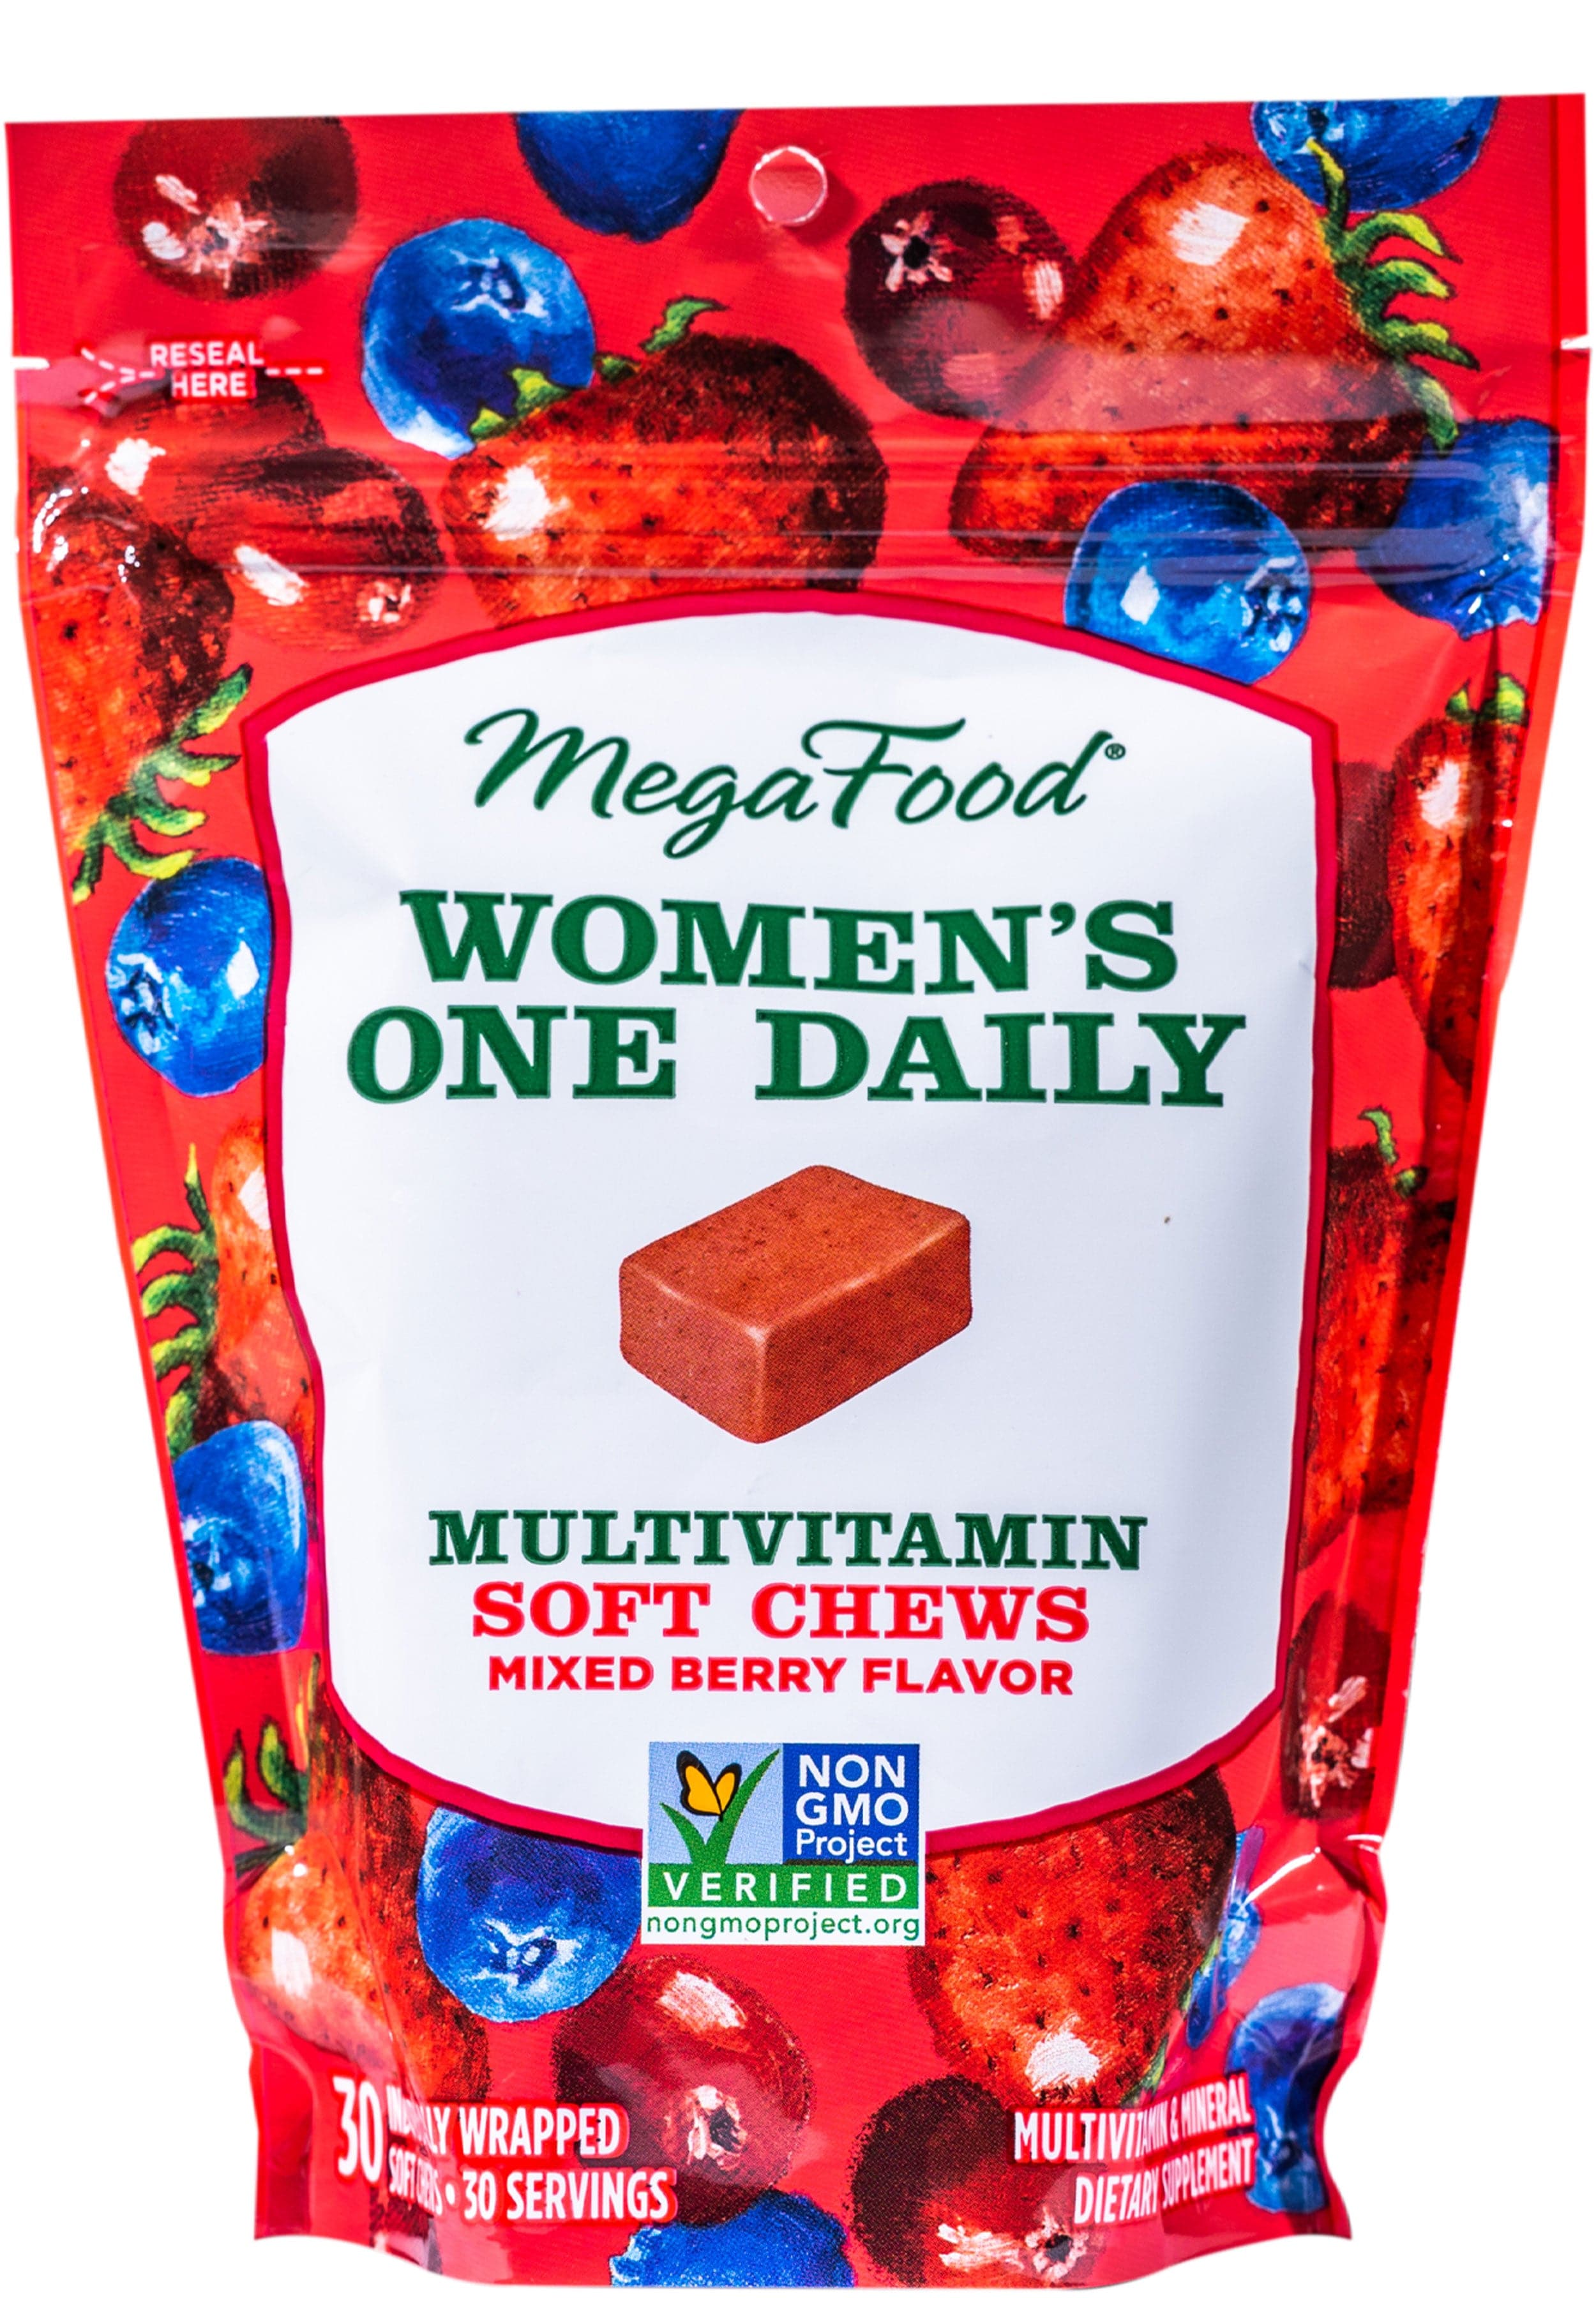 MegaFood Women's One Daily Multivitamin Soft Chews